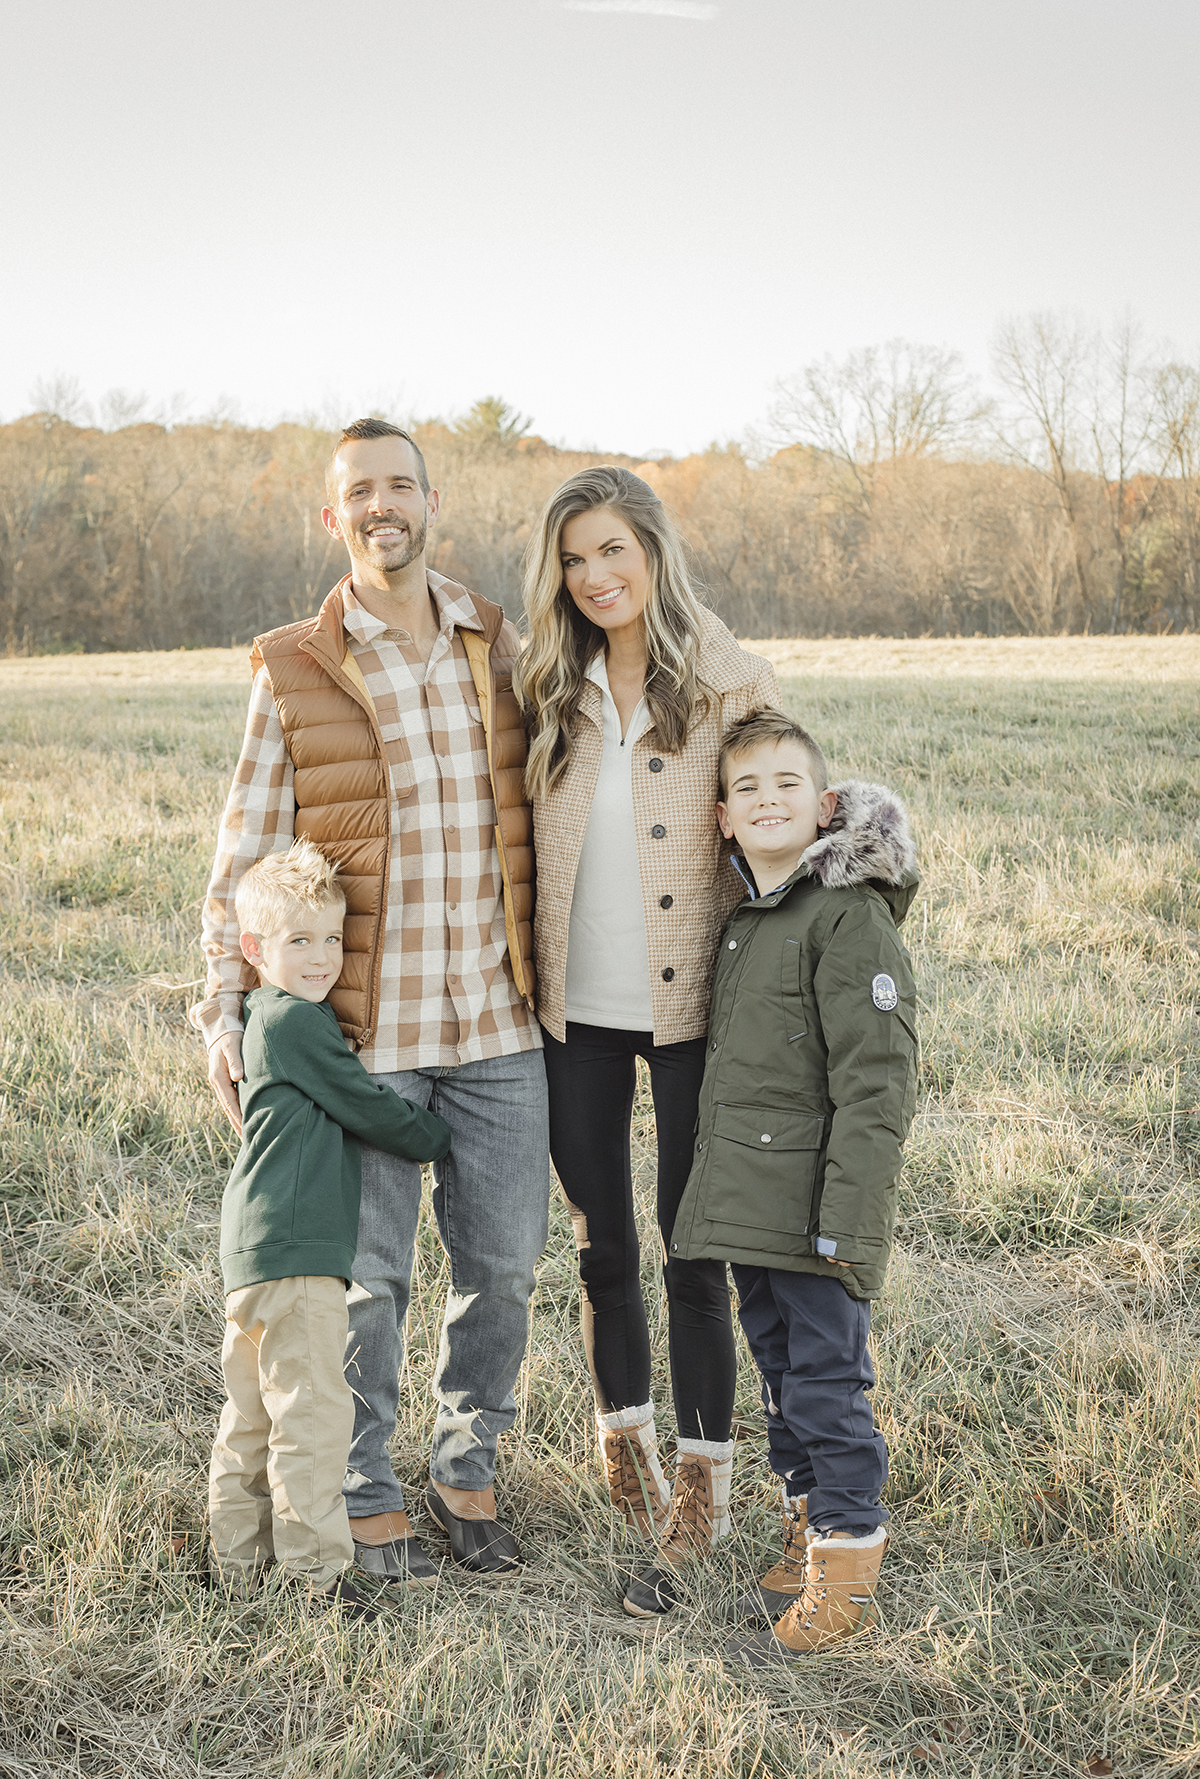 Fall Family Photos - What to Wear Outfit and Inspiration Style Guide -  Kelly McPhail Photography